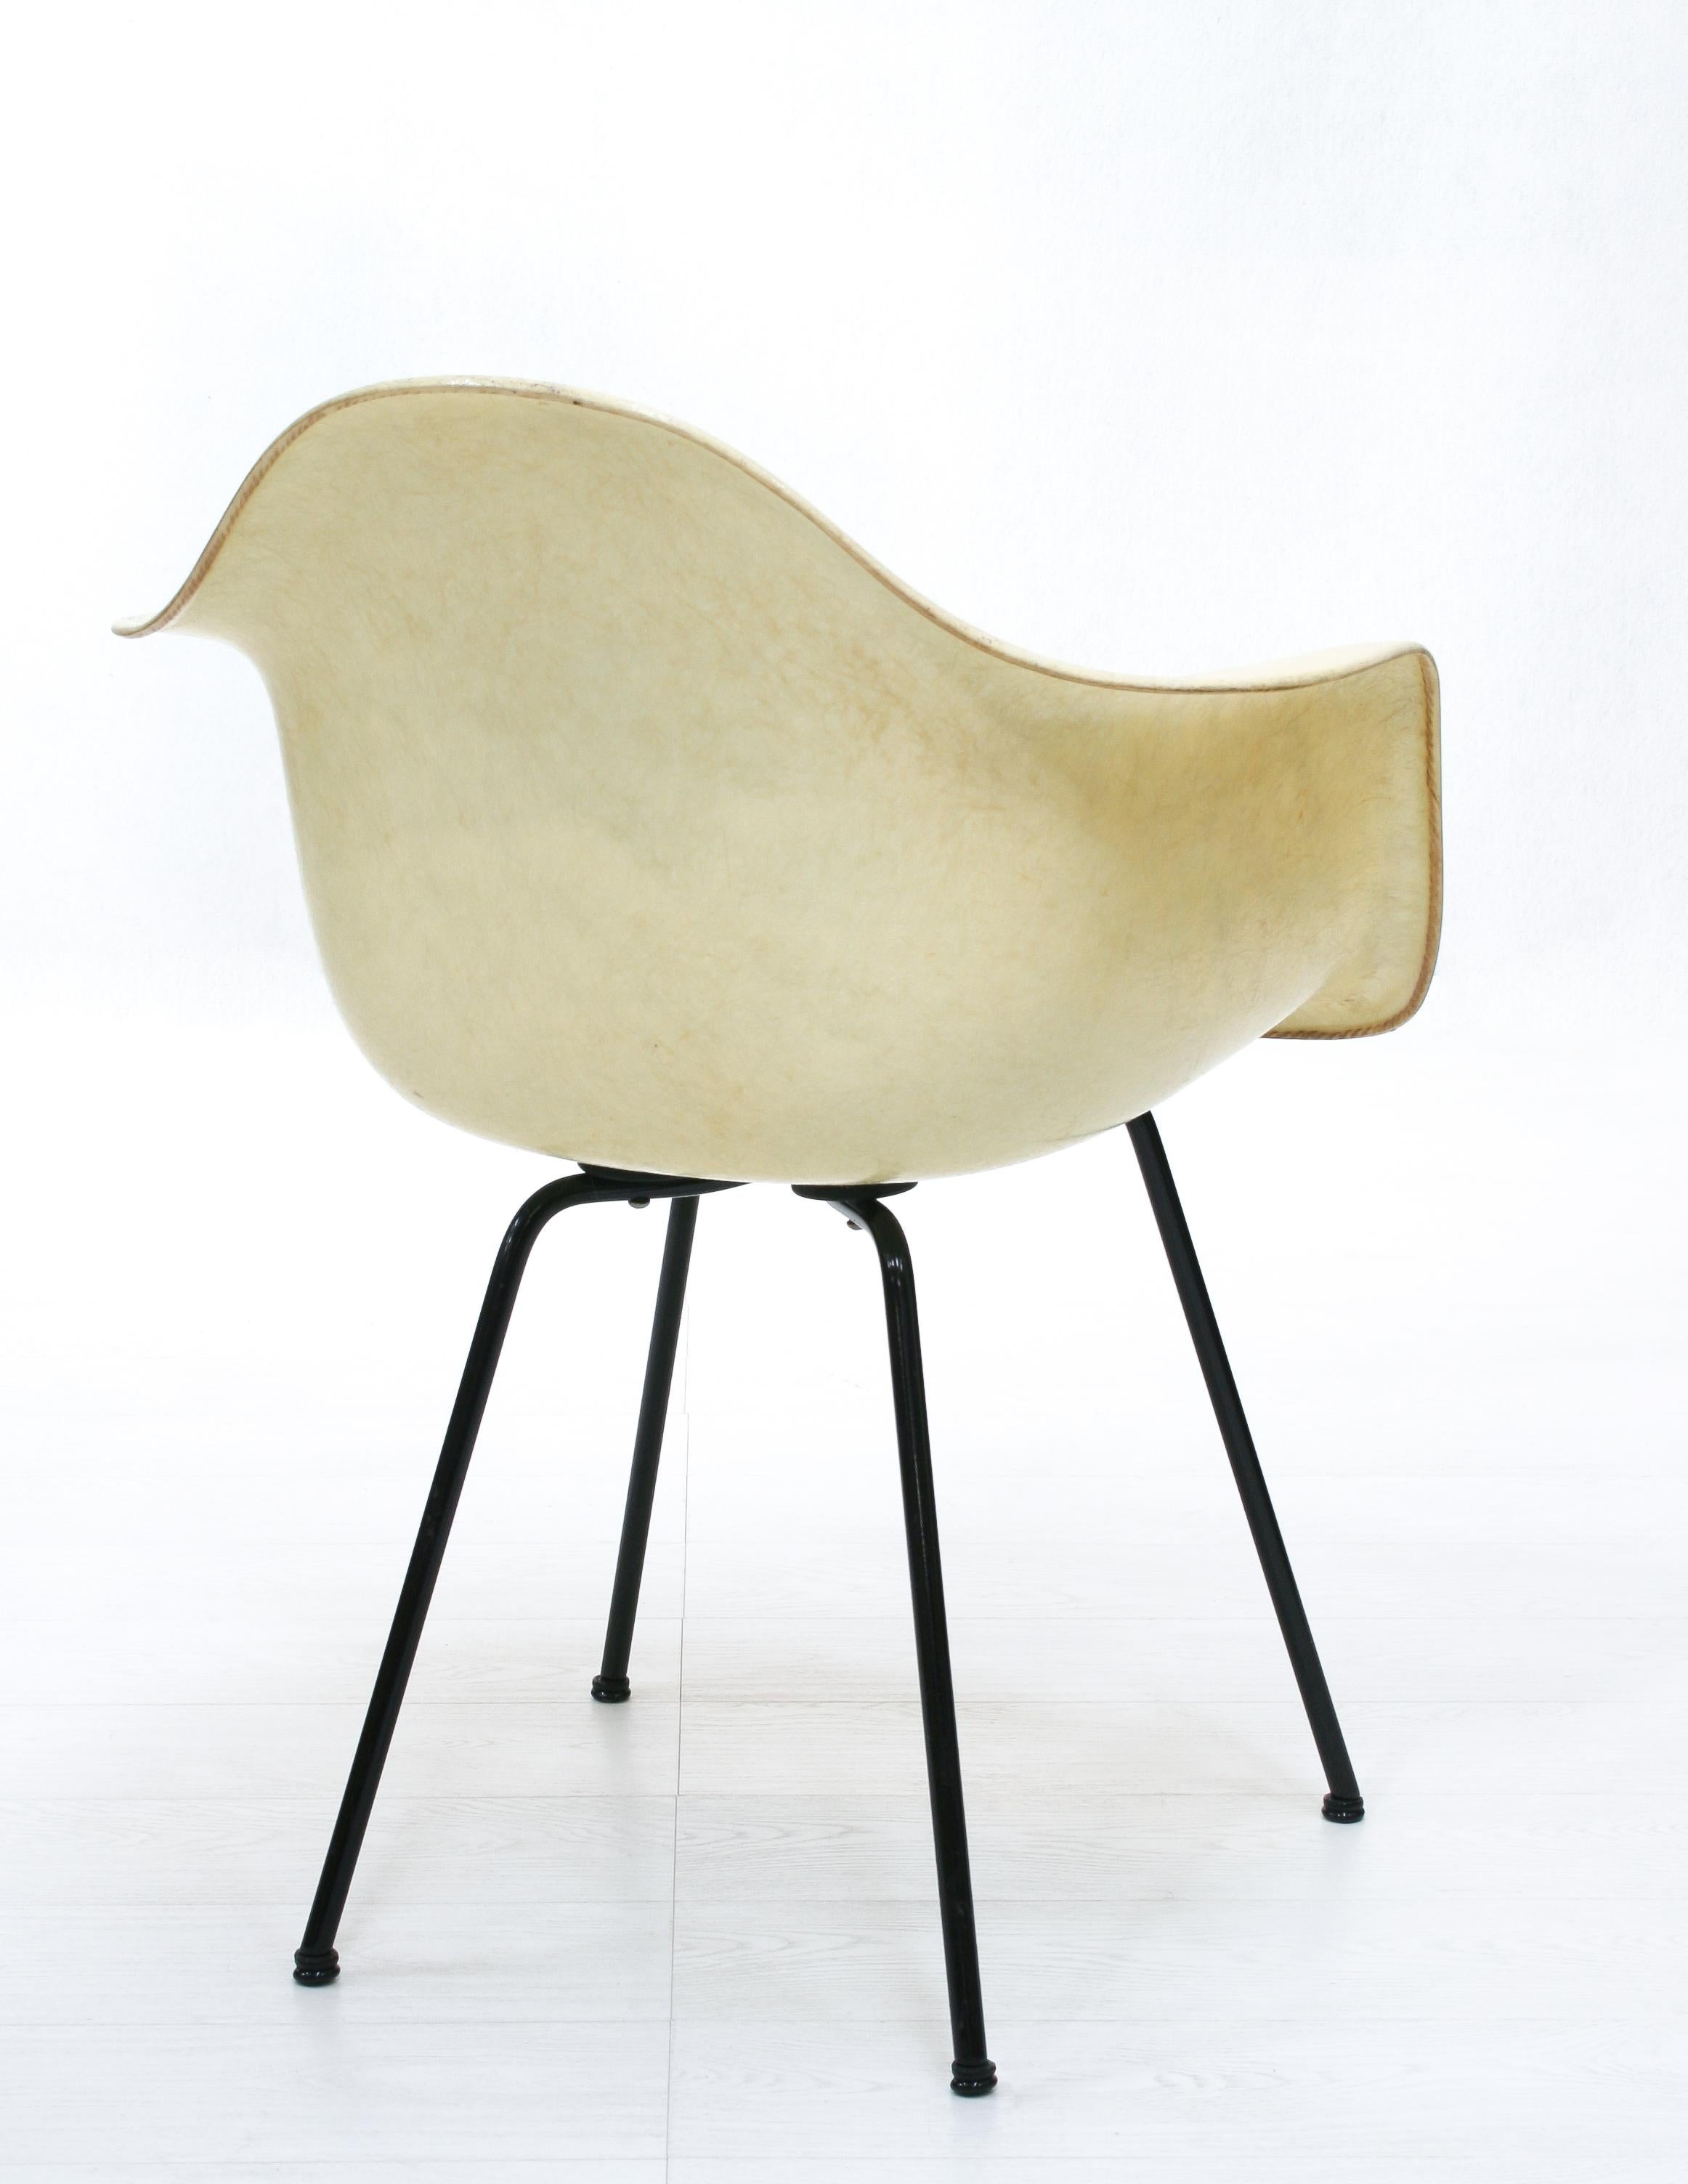 Original early 'rope edge' chair by Ray & Charles Eames for Zenith Plastics